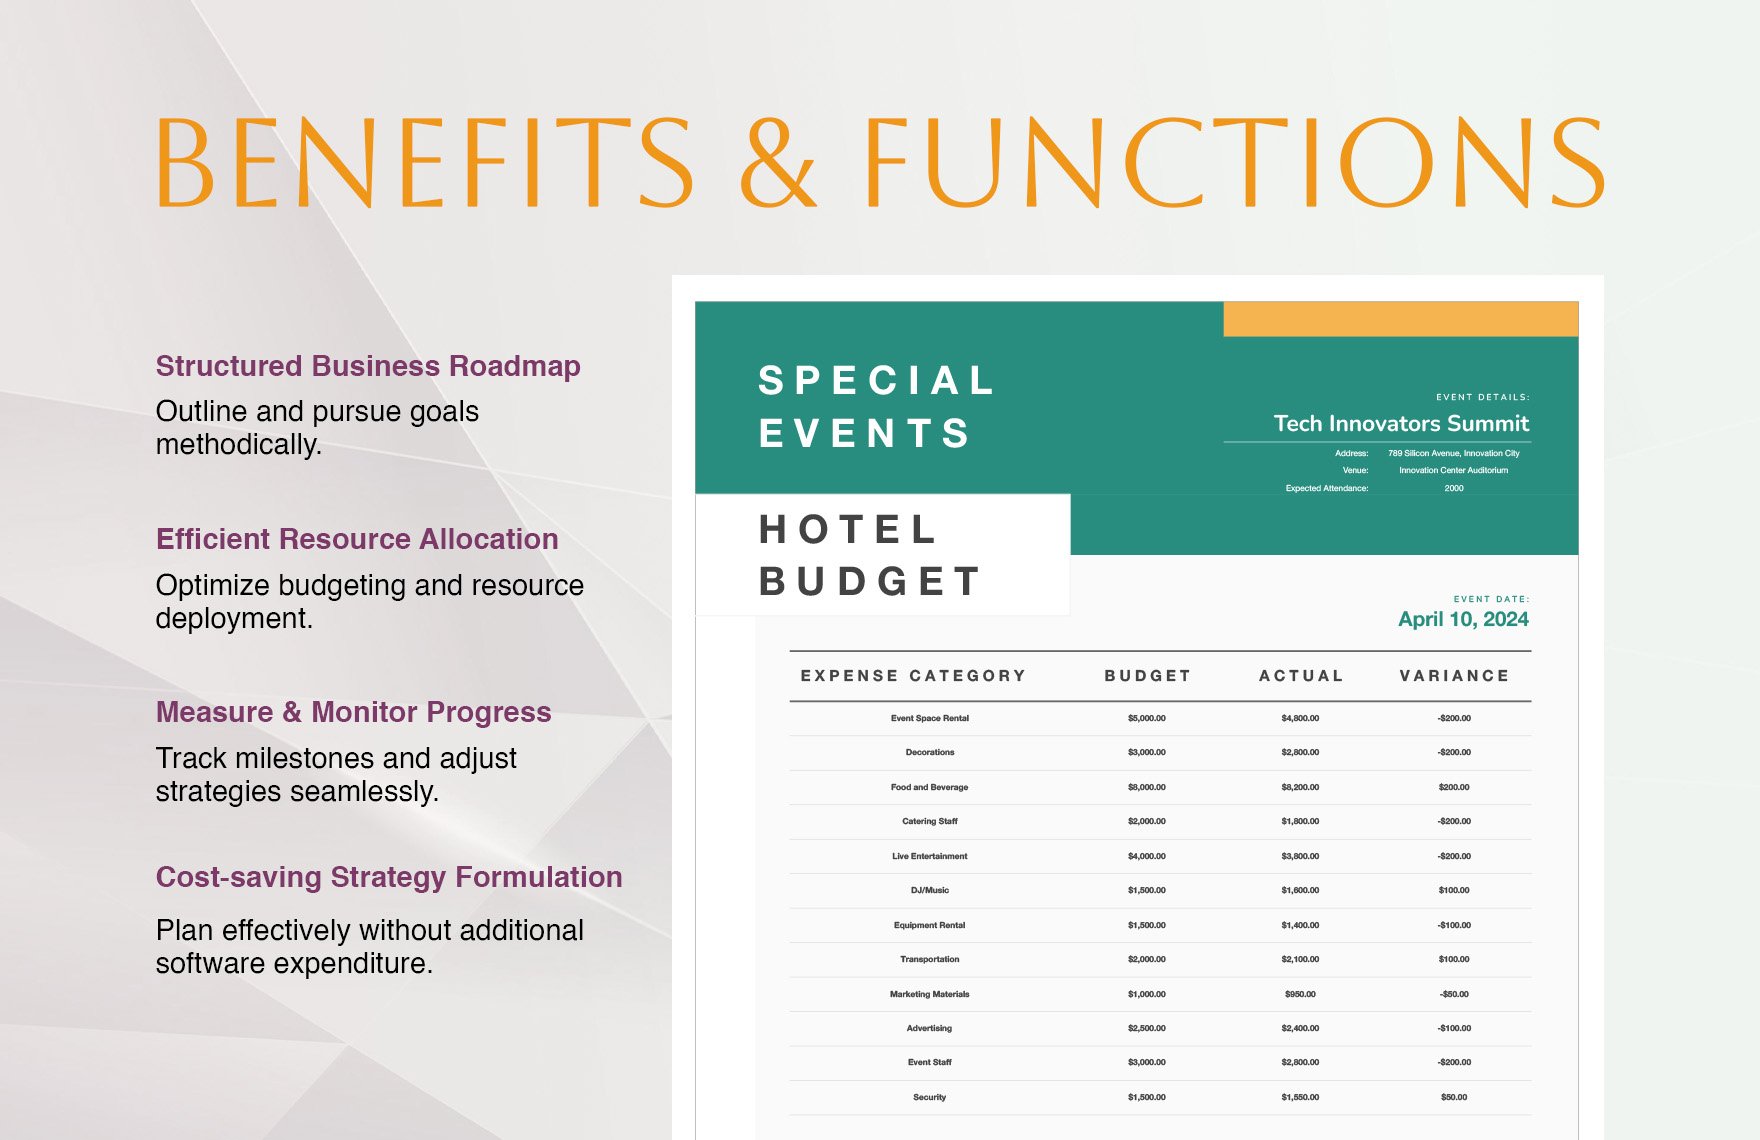 Hotel Special Events Budget Template